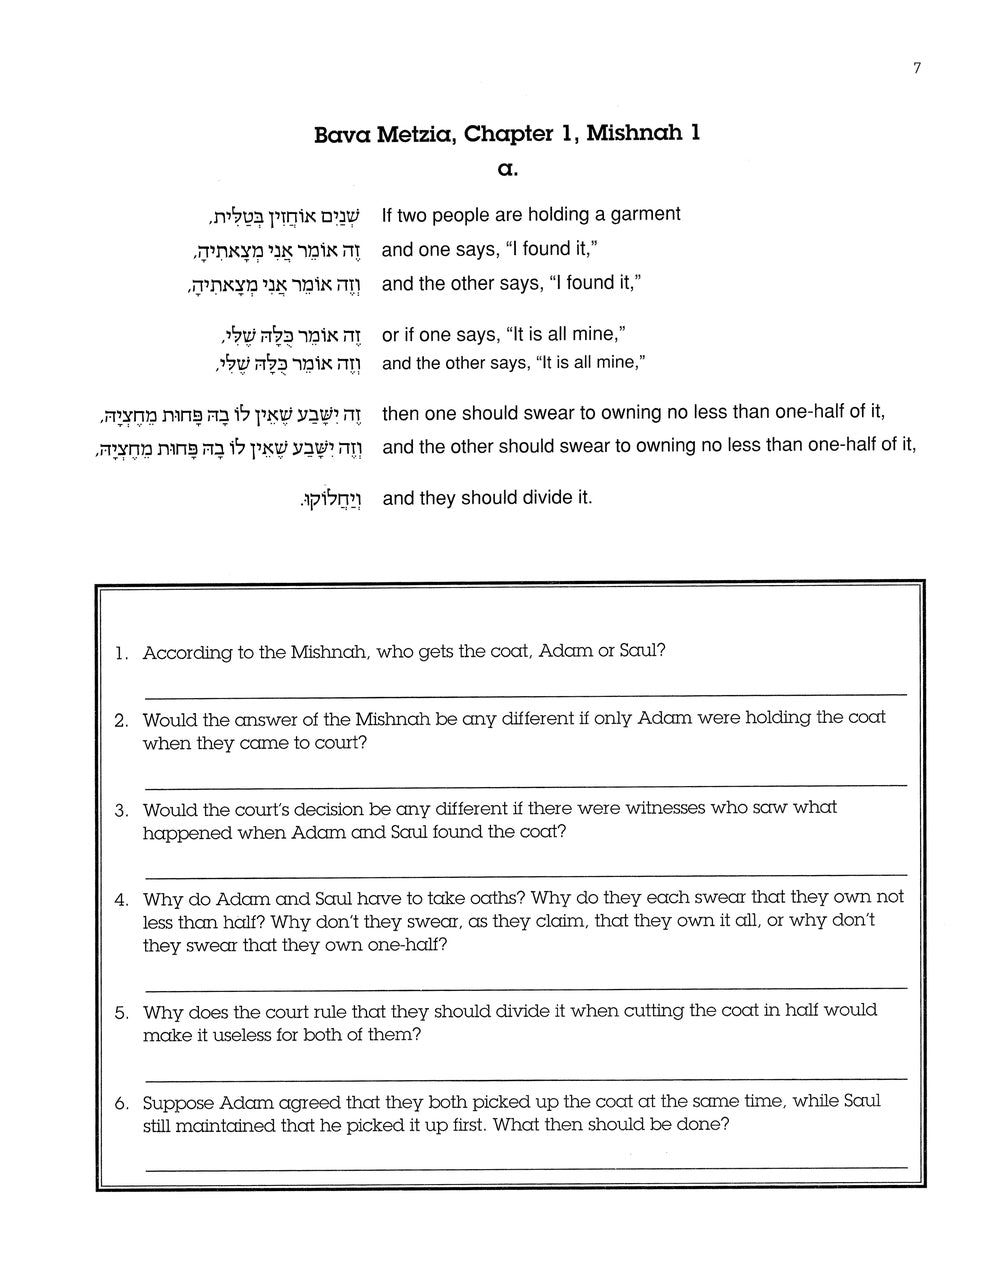 Jewish Law Review 1: Mishnah on Damages